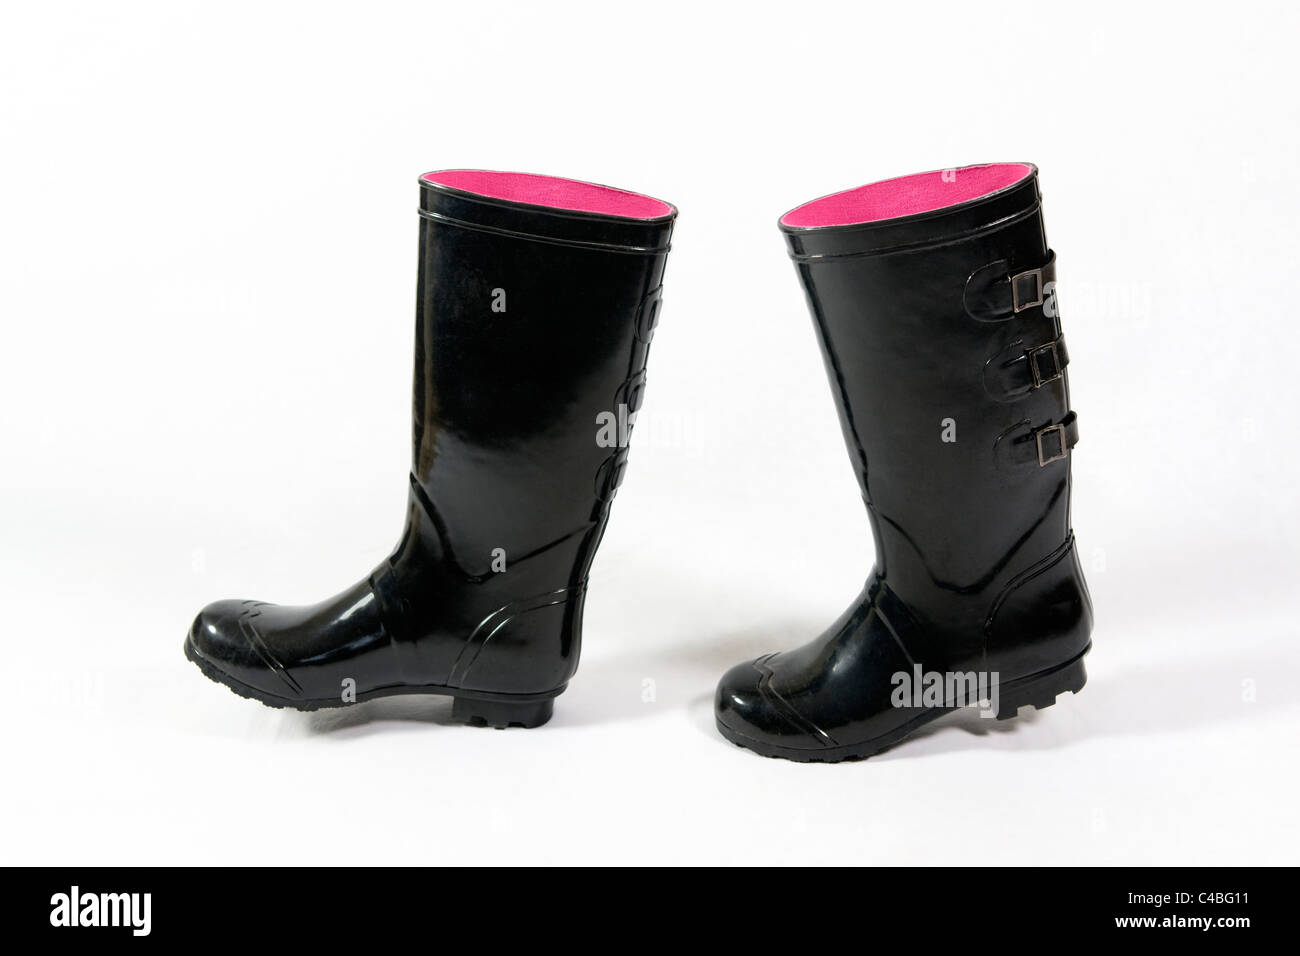 A pair of black wellies, or wellington boots with pink inside taken against a white background positioned as if they are walking Stock Photo